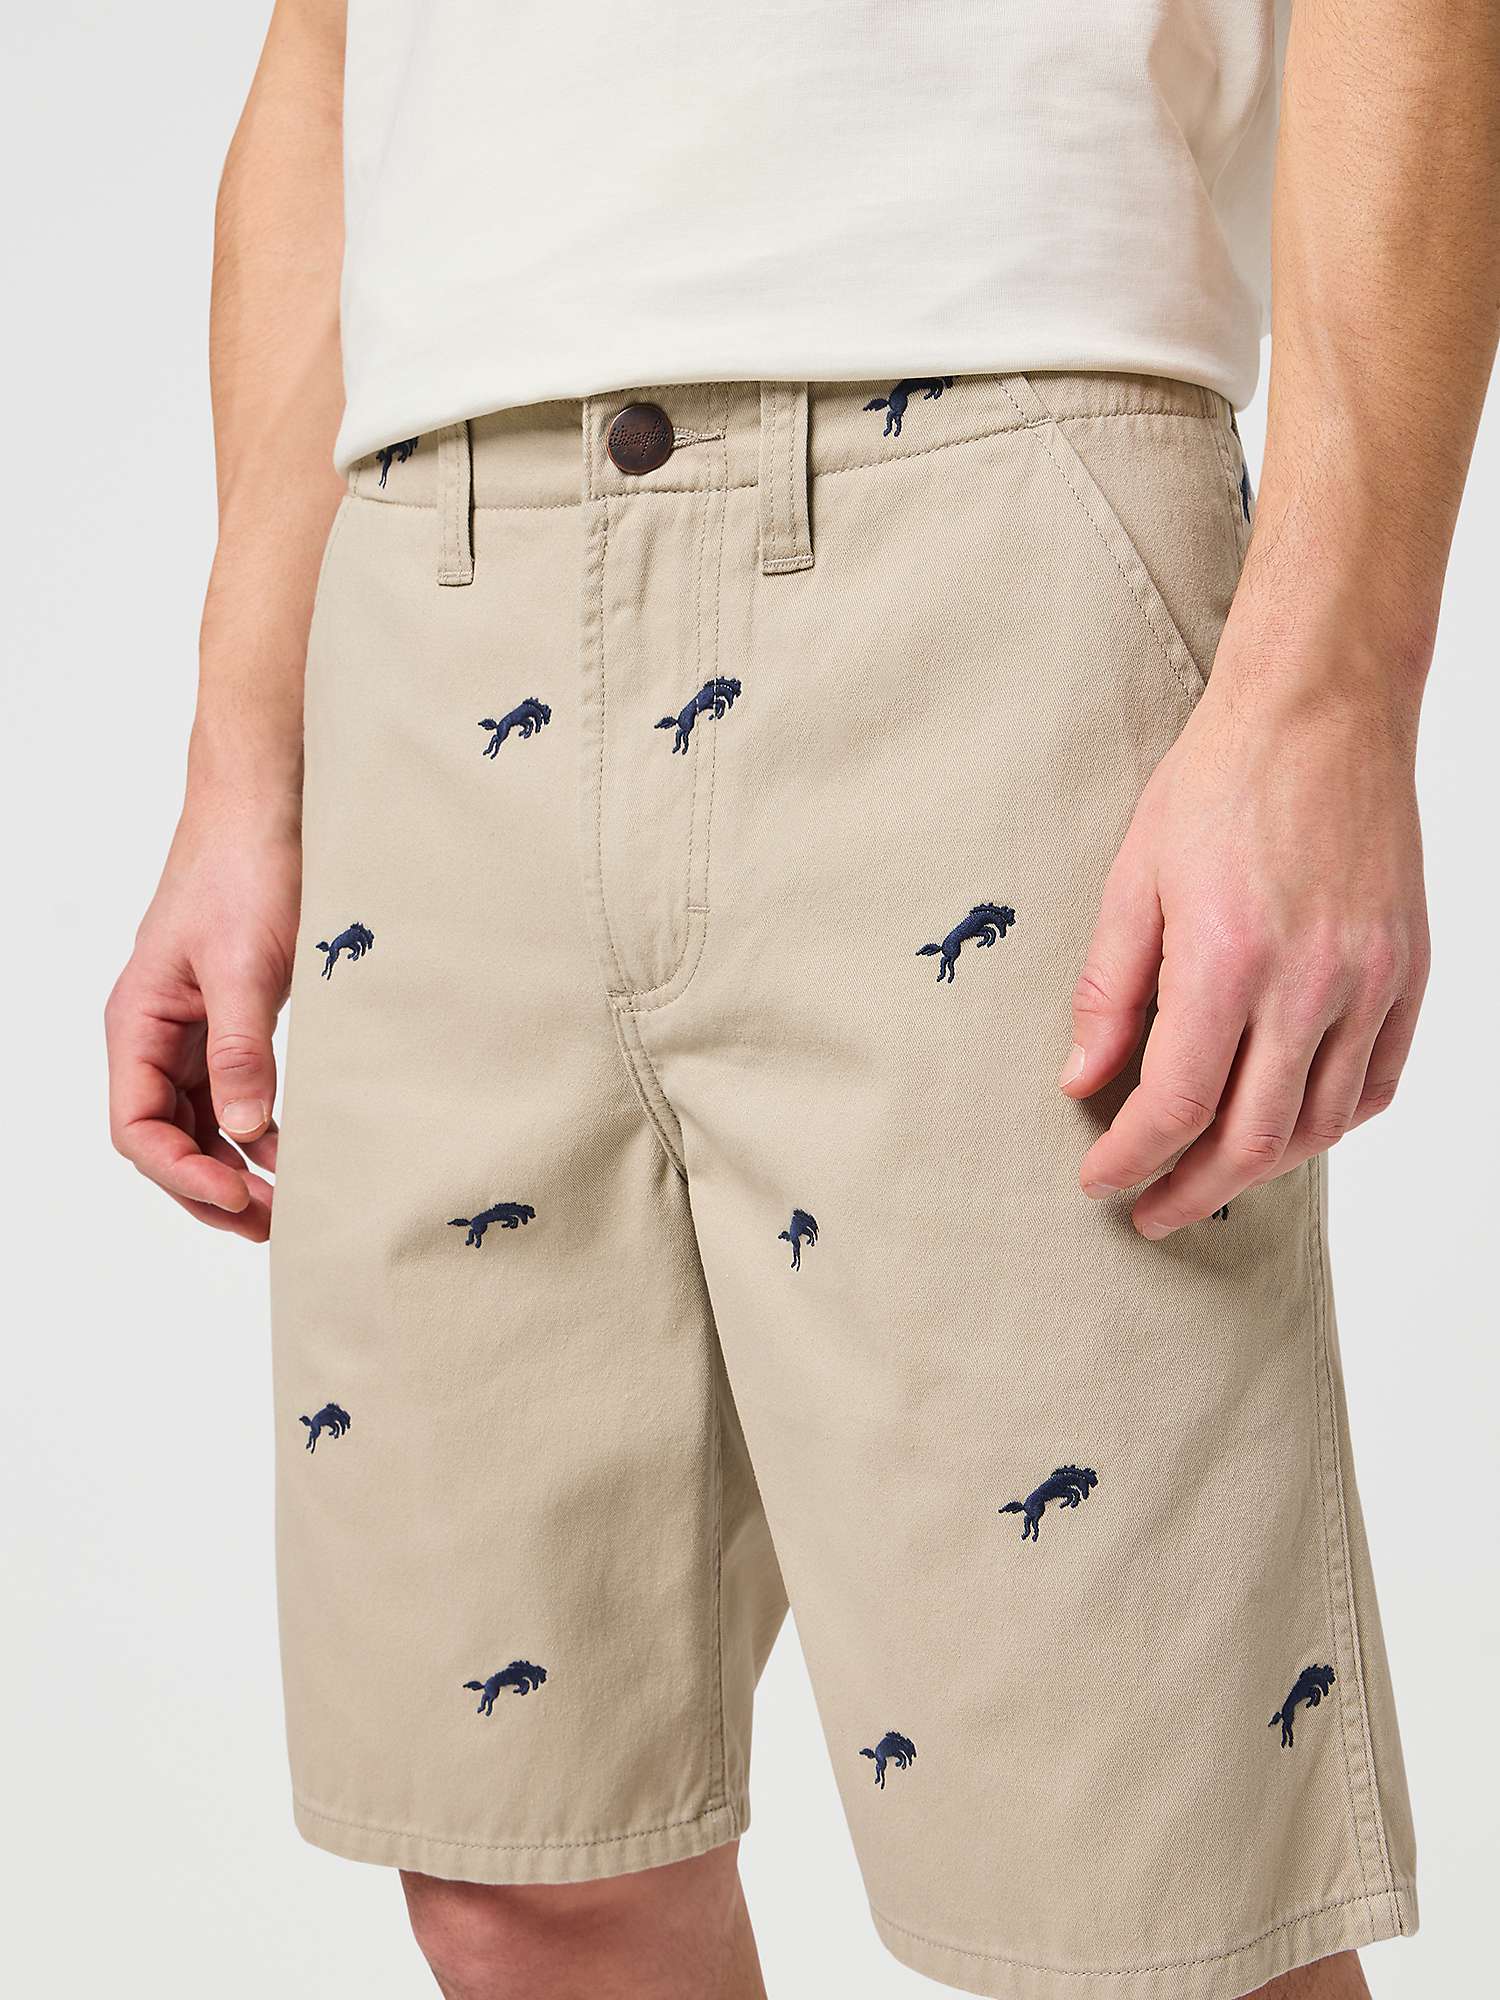 Buy Wrangler Critter Chino Shorts, Plaza Taupe Online at johnlewis.com